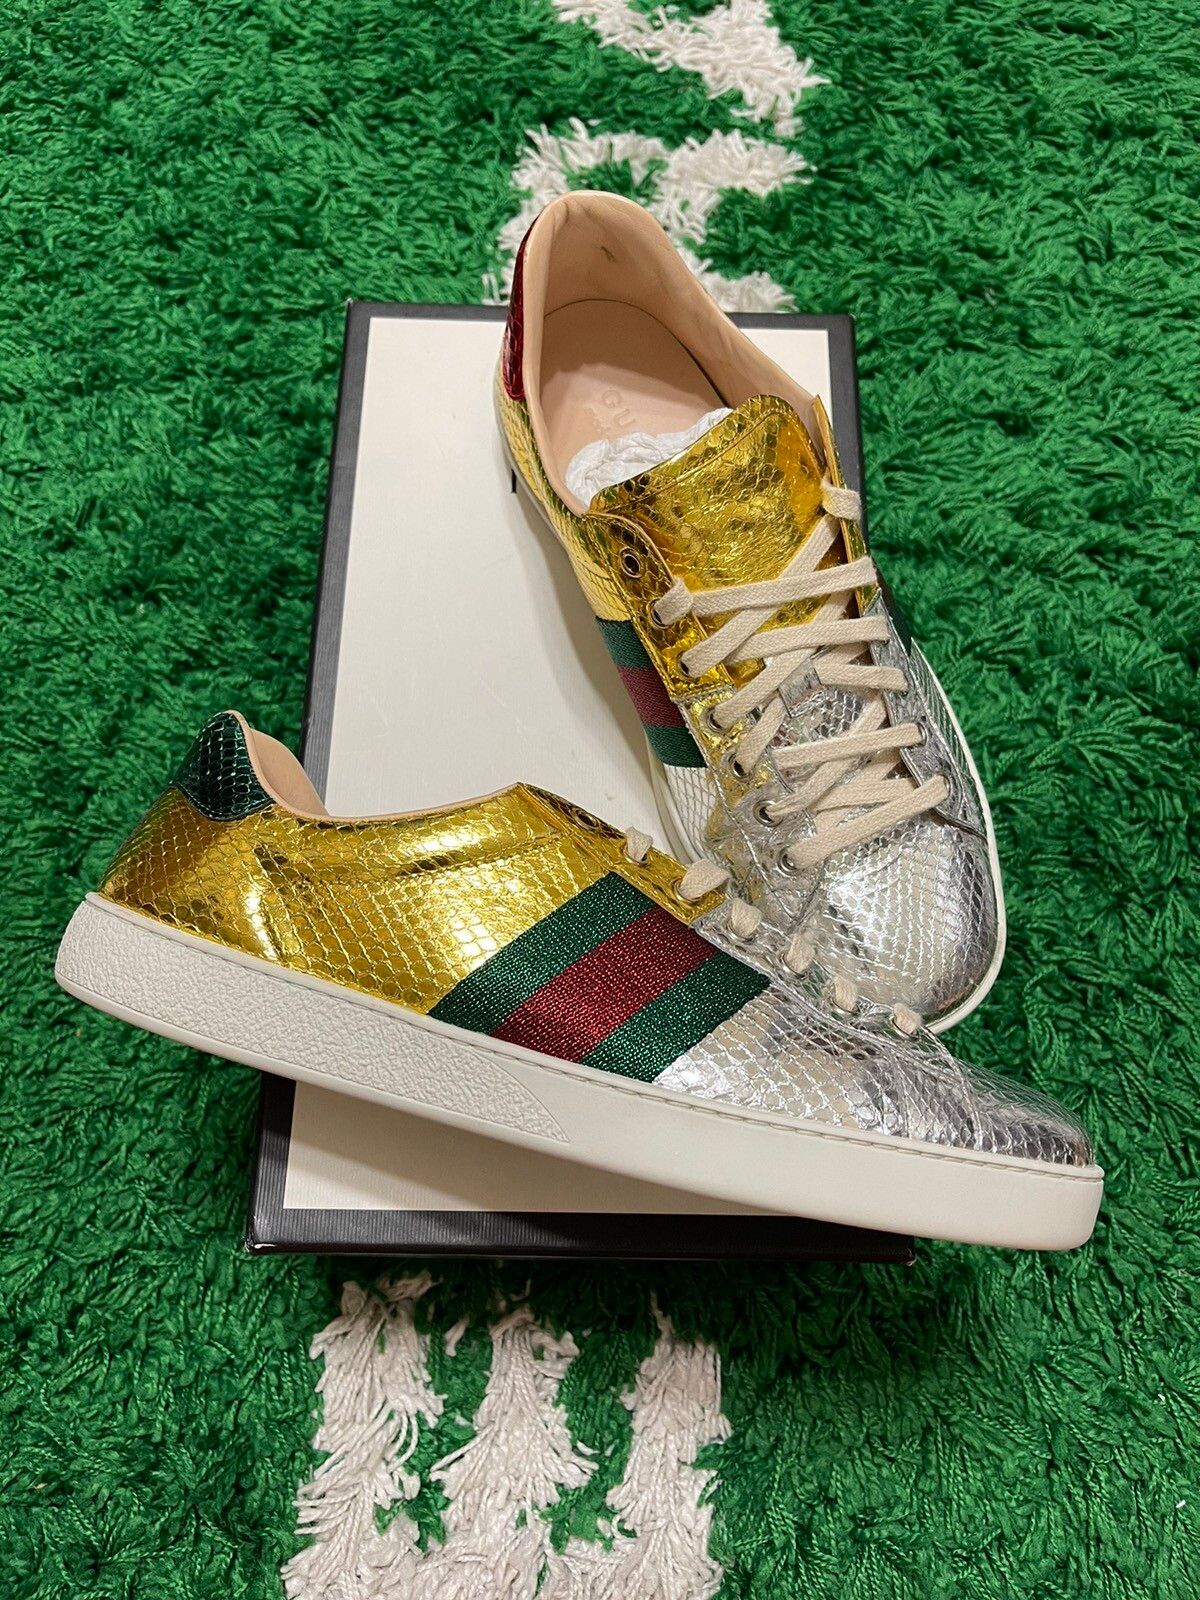 NEW GUCCI ACE SNEAKERS GG LOGO METALLIC LEATHER GOLD 10.5G MENS